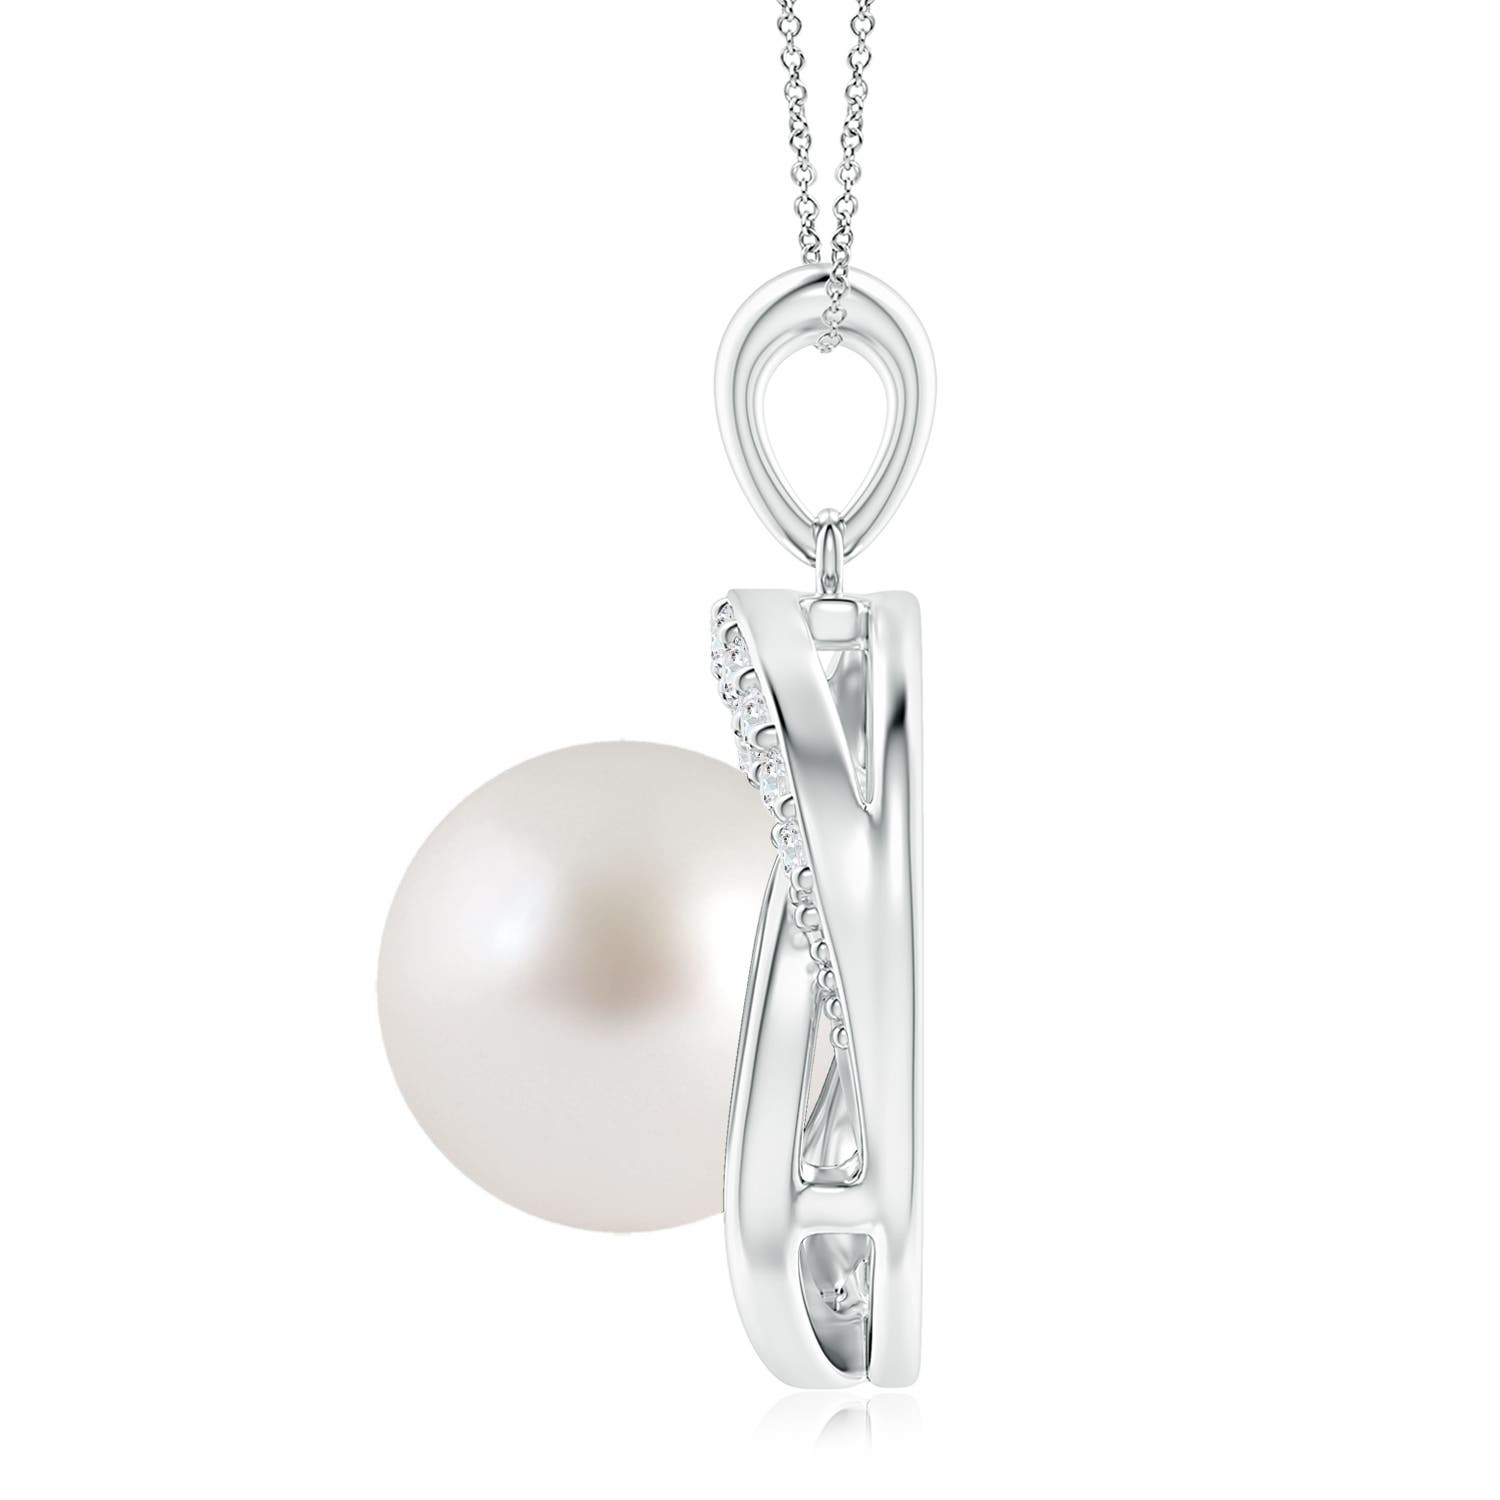 AAA - South Sea Cultured Pearl / 9.76 CT / 14 KT White Gold